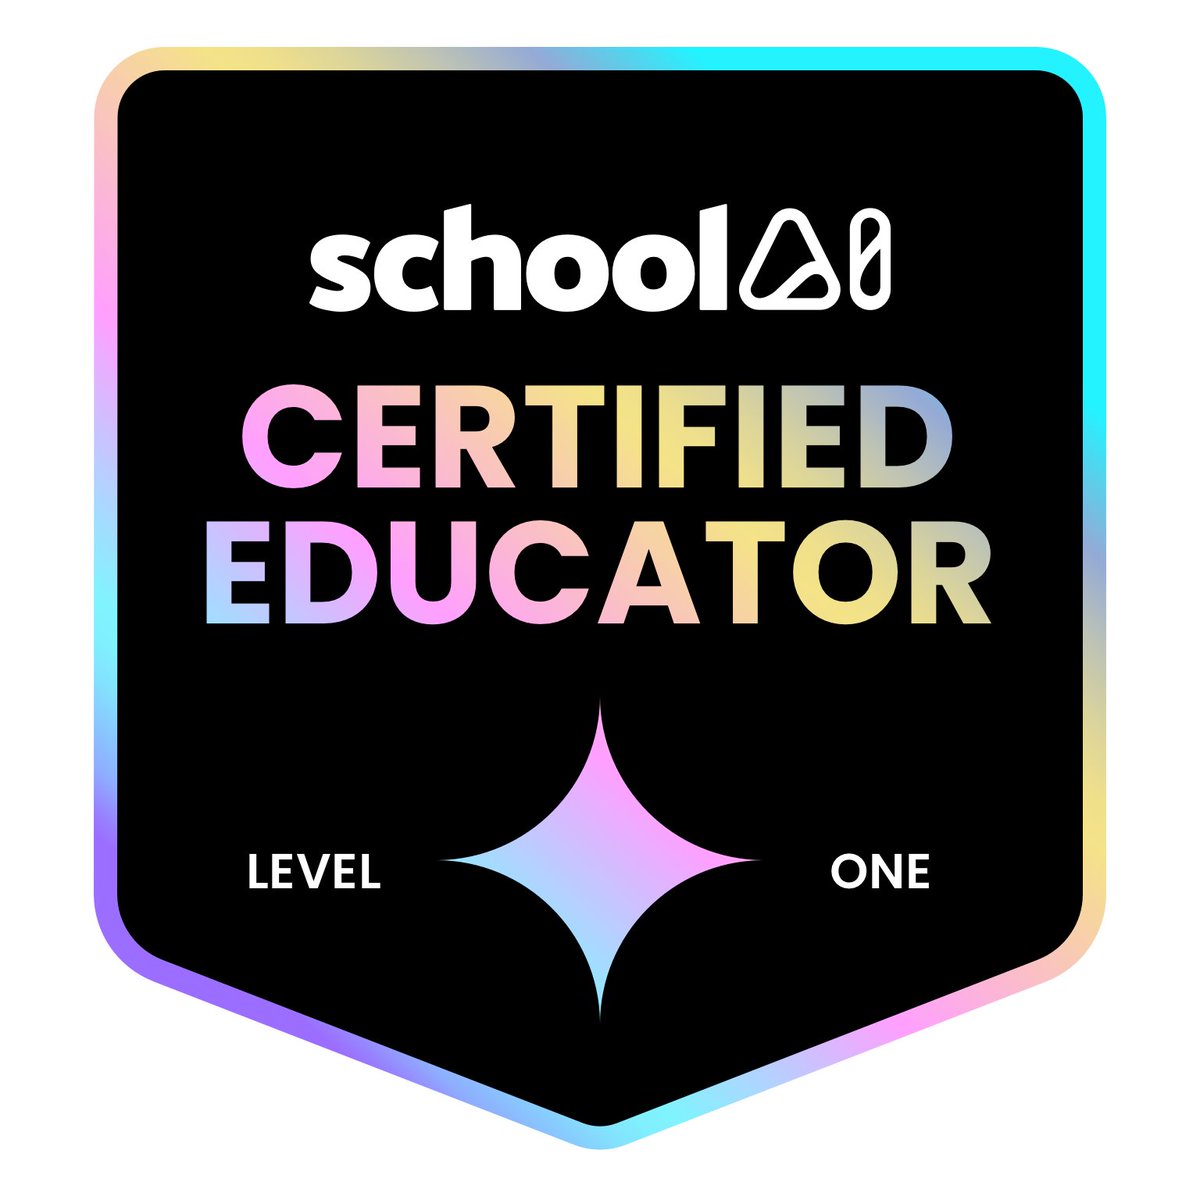 Hey! Check it out, another #edtech badge & app! What a GREAT tool! Thanks @GetSchoolAI for an awesome course - Bring on Level 2. #teachertwitter #schoolai #schoollibrarian #librarian #SchoolAI